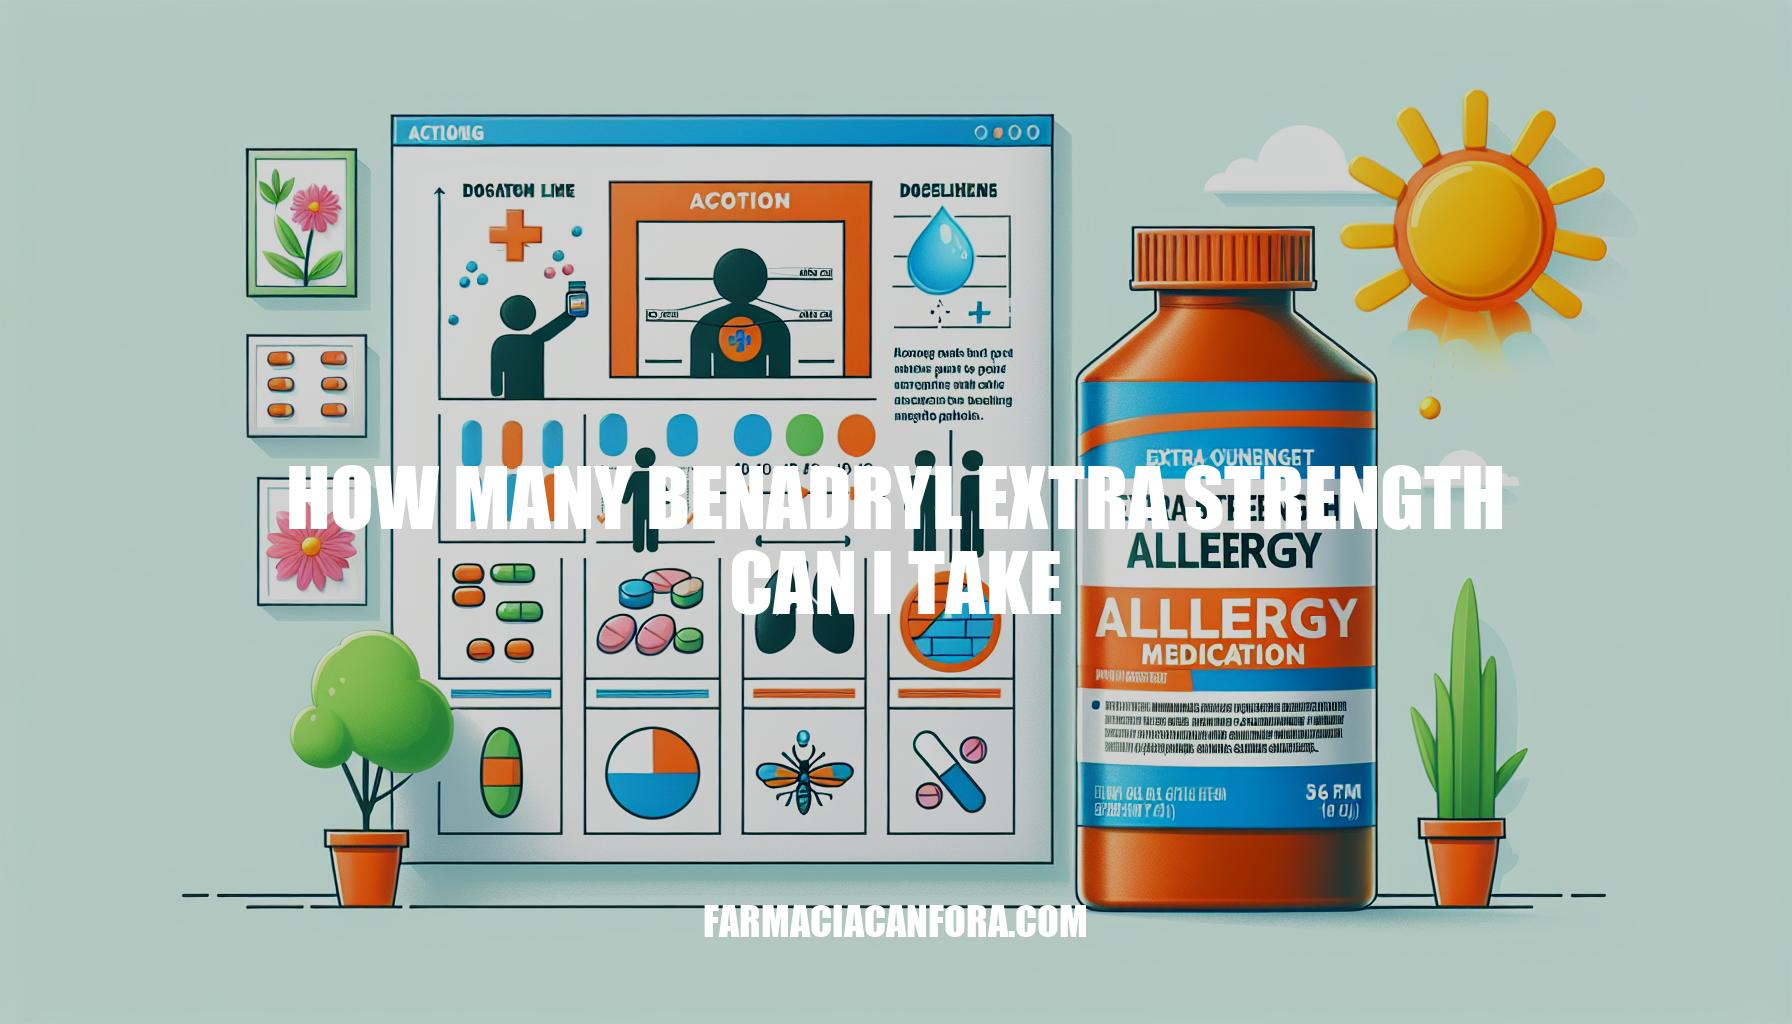 How Many Benadryl Extra Strength Can I Take: Dosage Guidelines